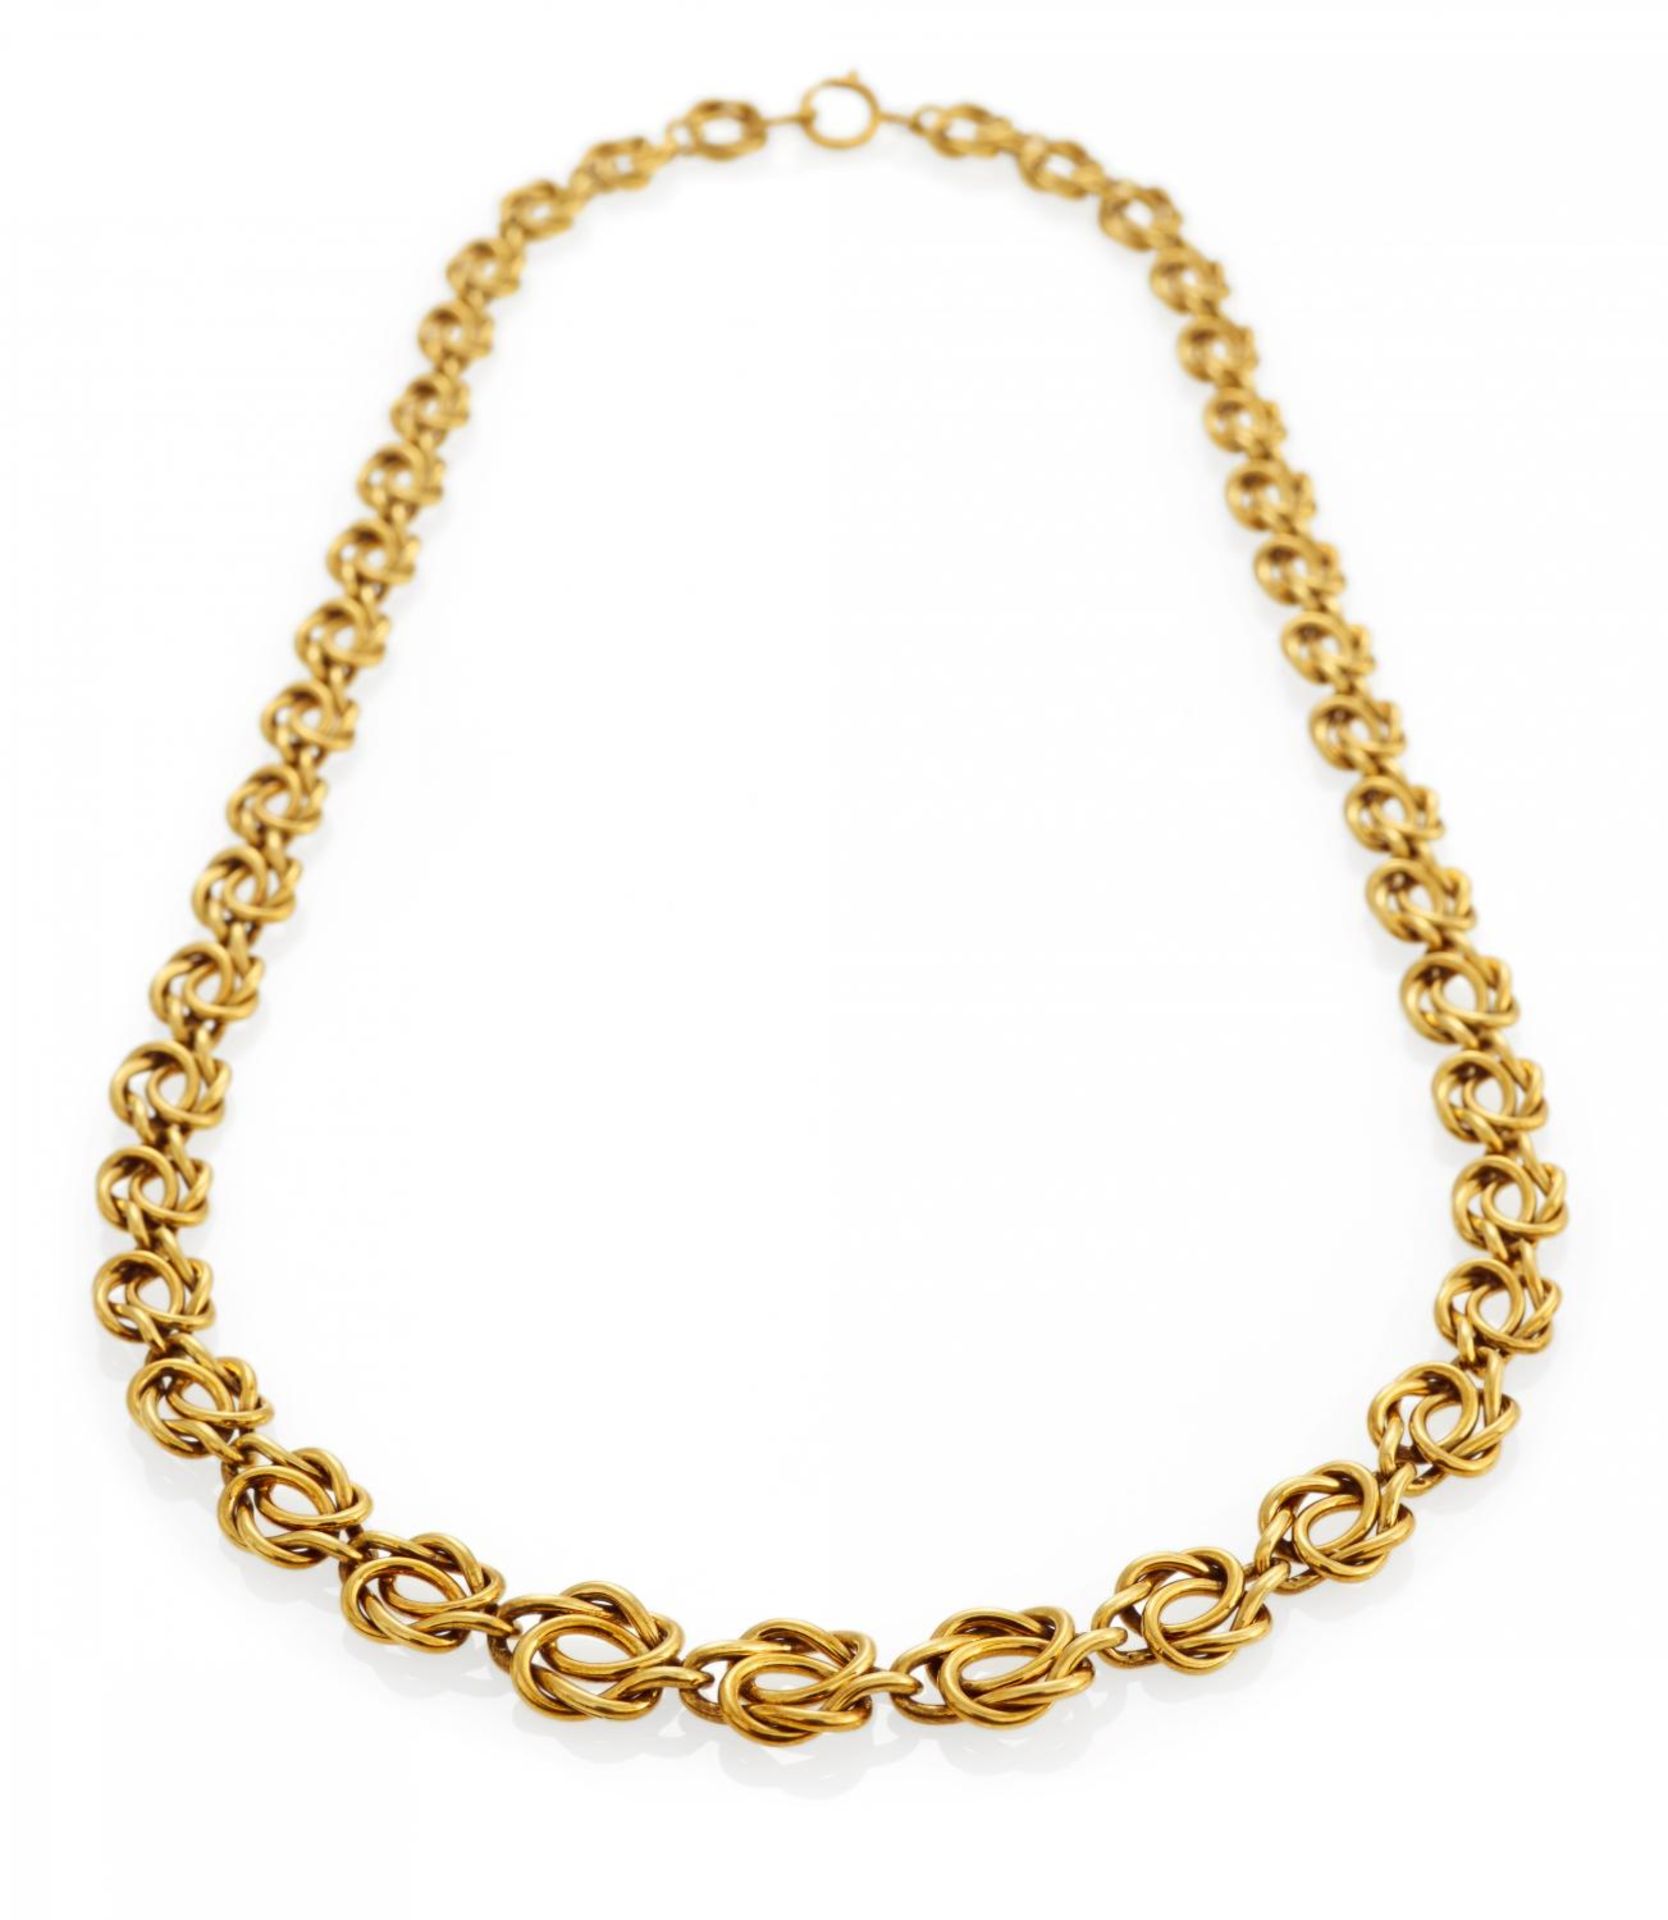 C. A. BEUMERS1860 - 1928Gold-Necklace. Germany, ca. 1900. 585/- yellow gold, total weight: 35,5g. - Bild 2 aus 2